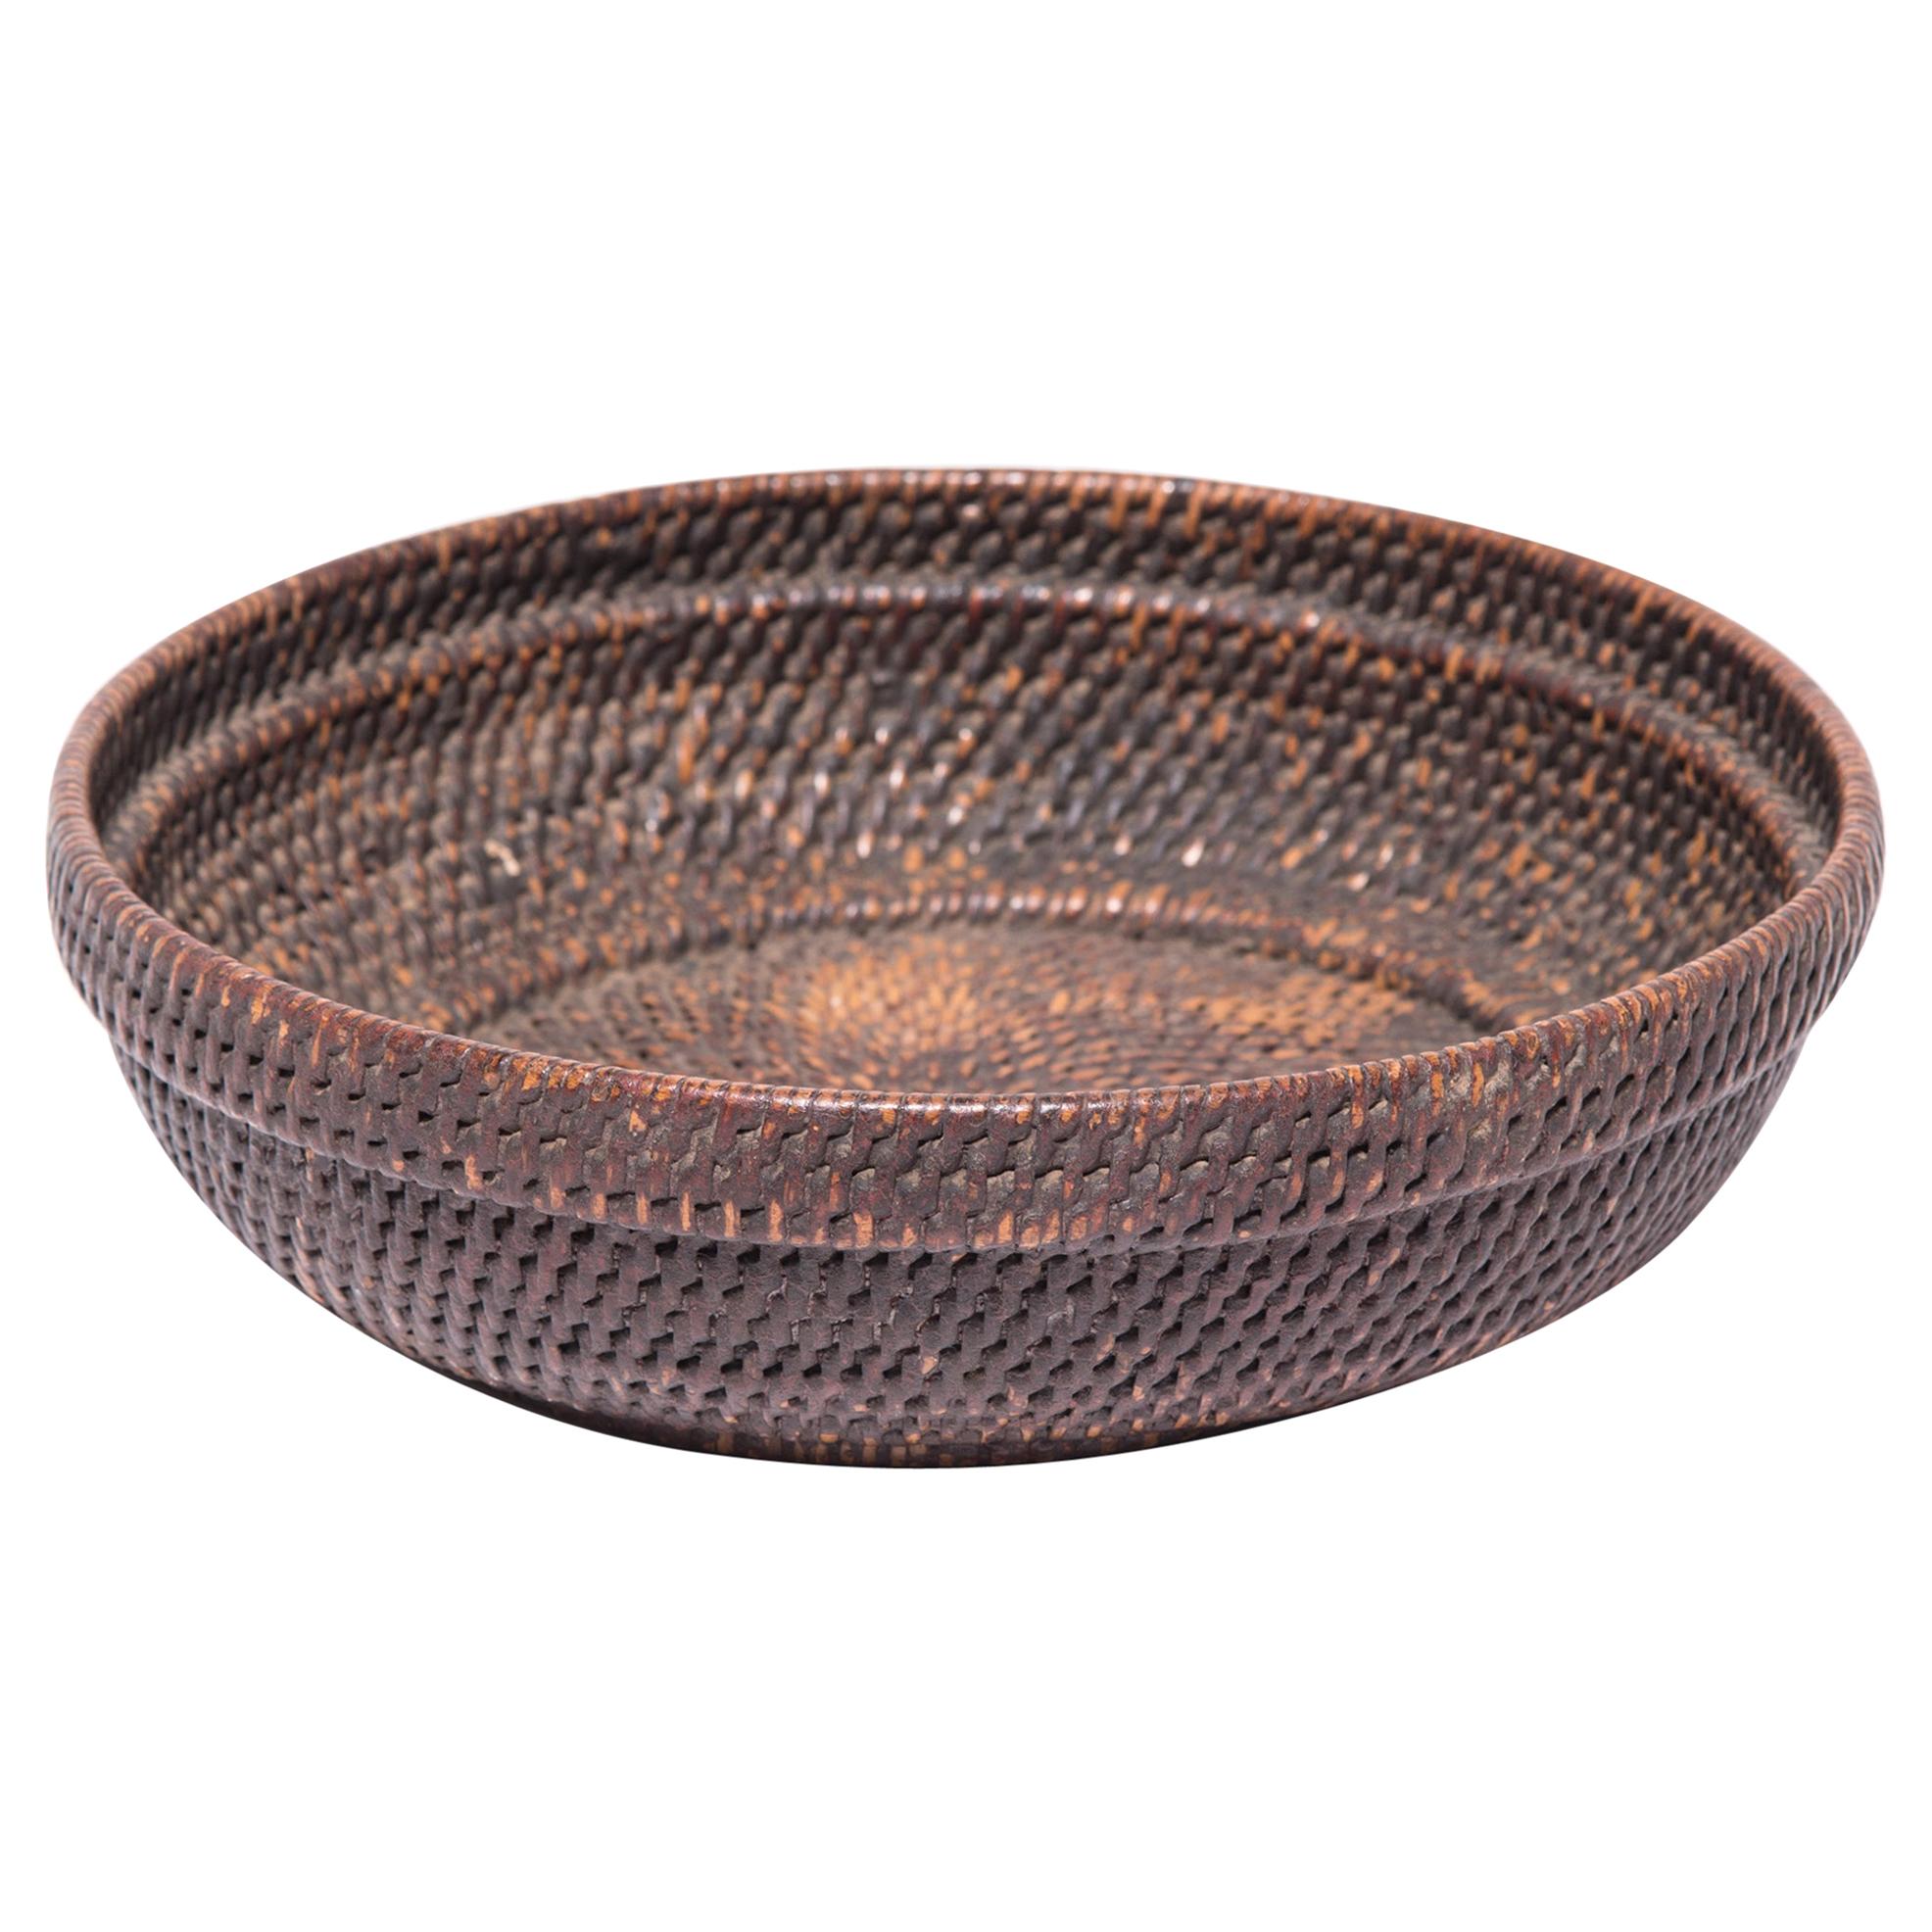 Early 20th Century Woven Offering Tray Basket